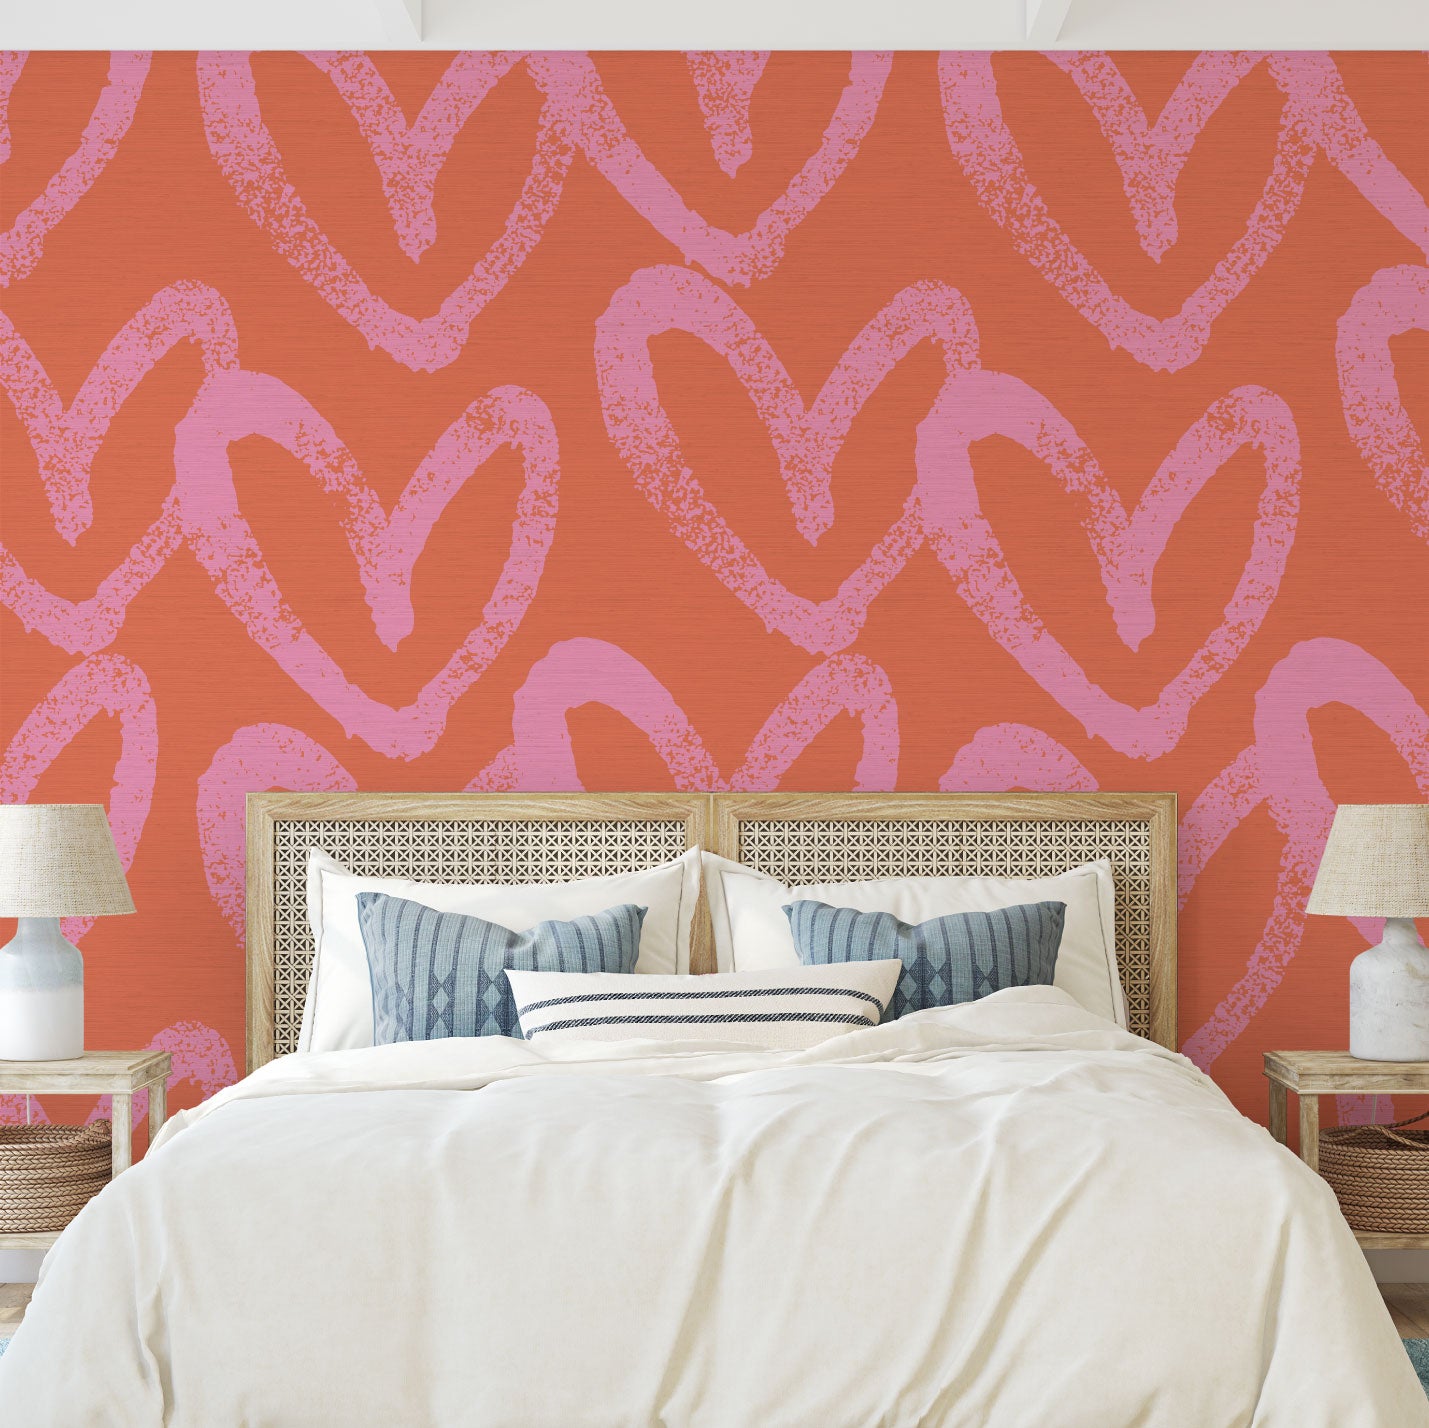 printed grasscloth wallpaper oversized heart print assortment collaboration with House of Shannon shan Natural Textured Eco-Friendly Non-toxic High-quality Sustainable practices Sustainability Interior Design Wall covering Bold Wallpaper Custom Tailor-made Retro chic kids playroom hand drawn fun pink coral hot pink red orange bedroom